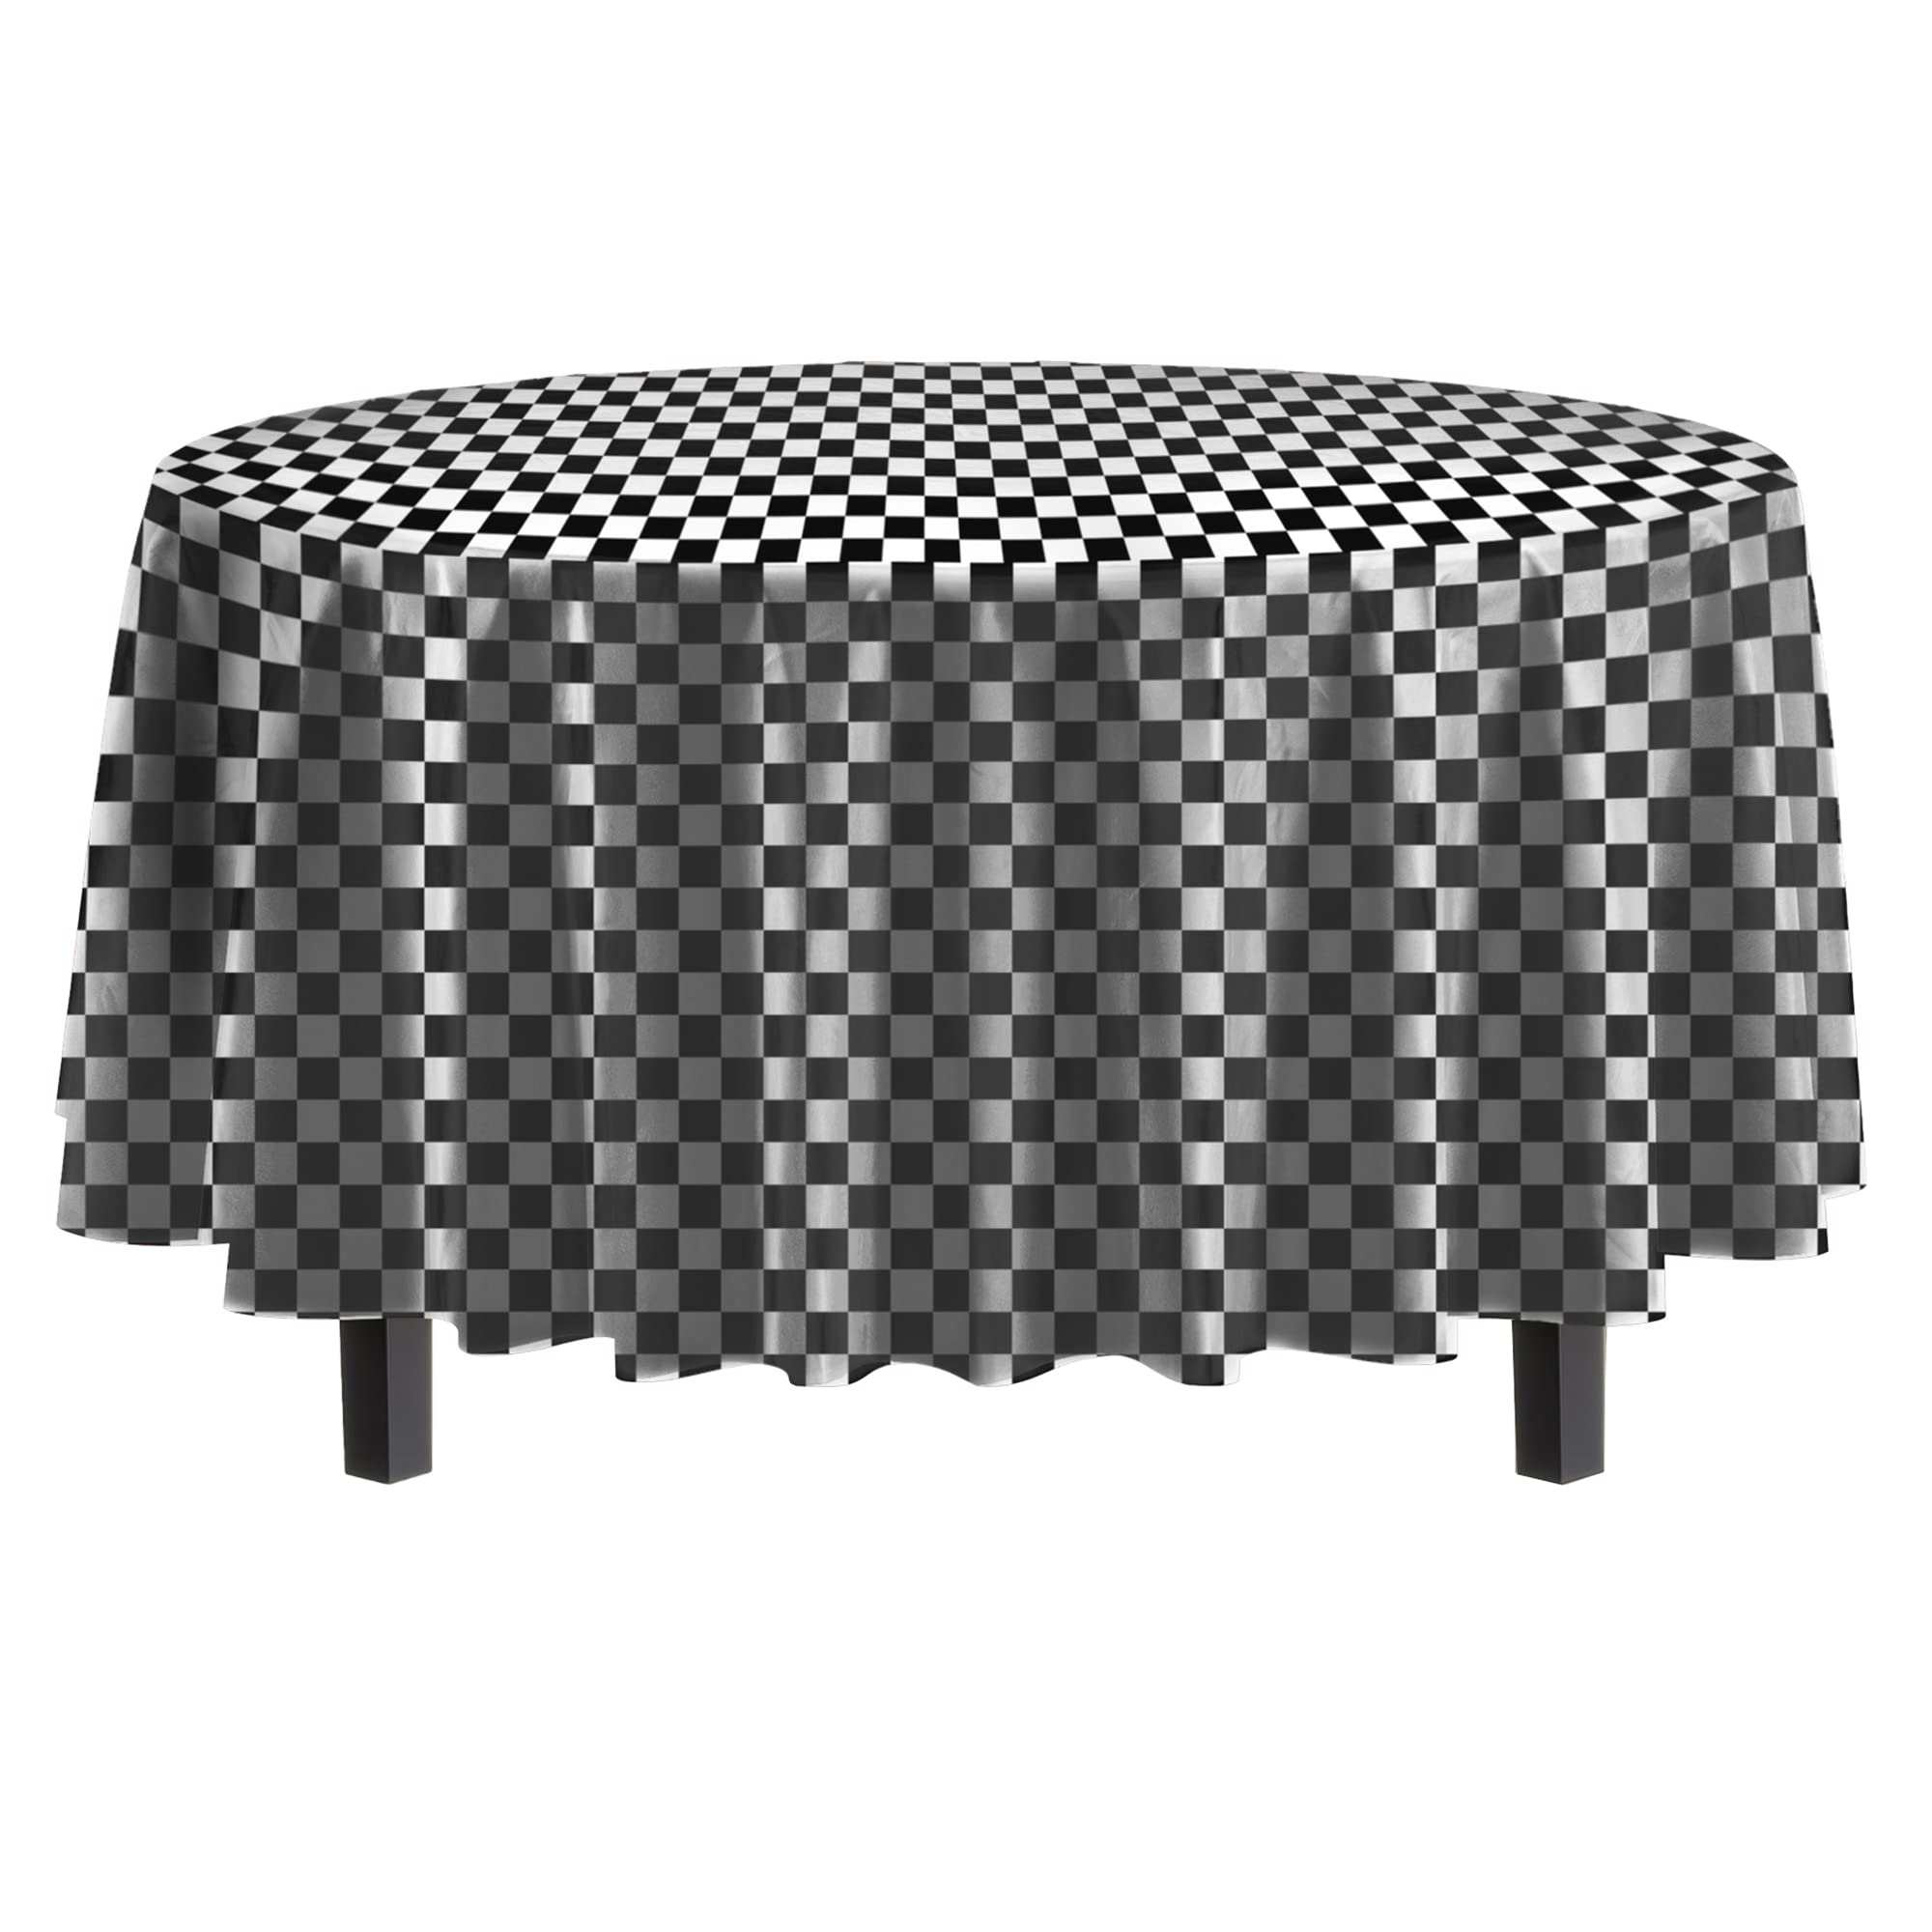 84" Round Black/White Checkered Table Cover